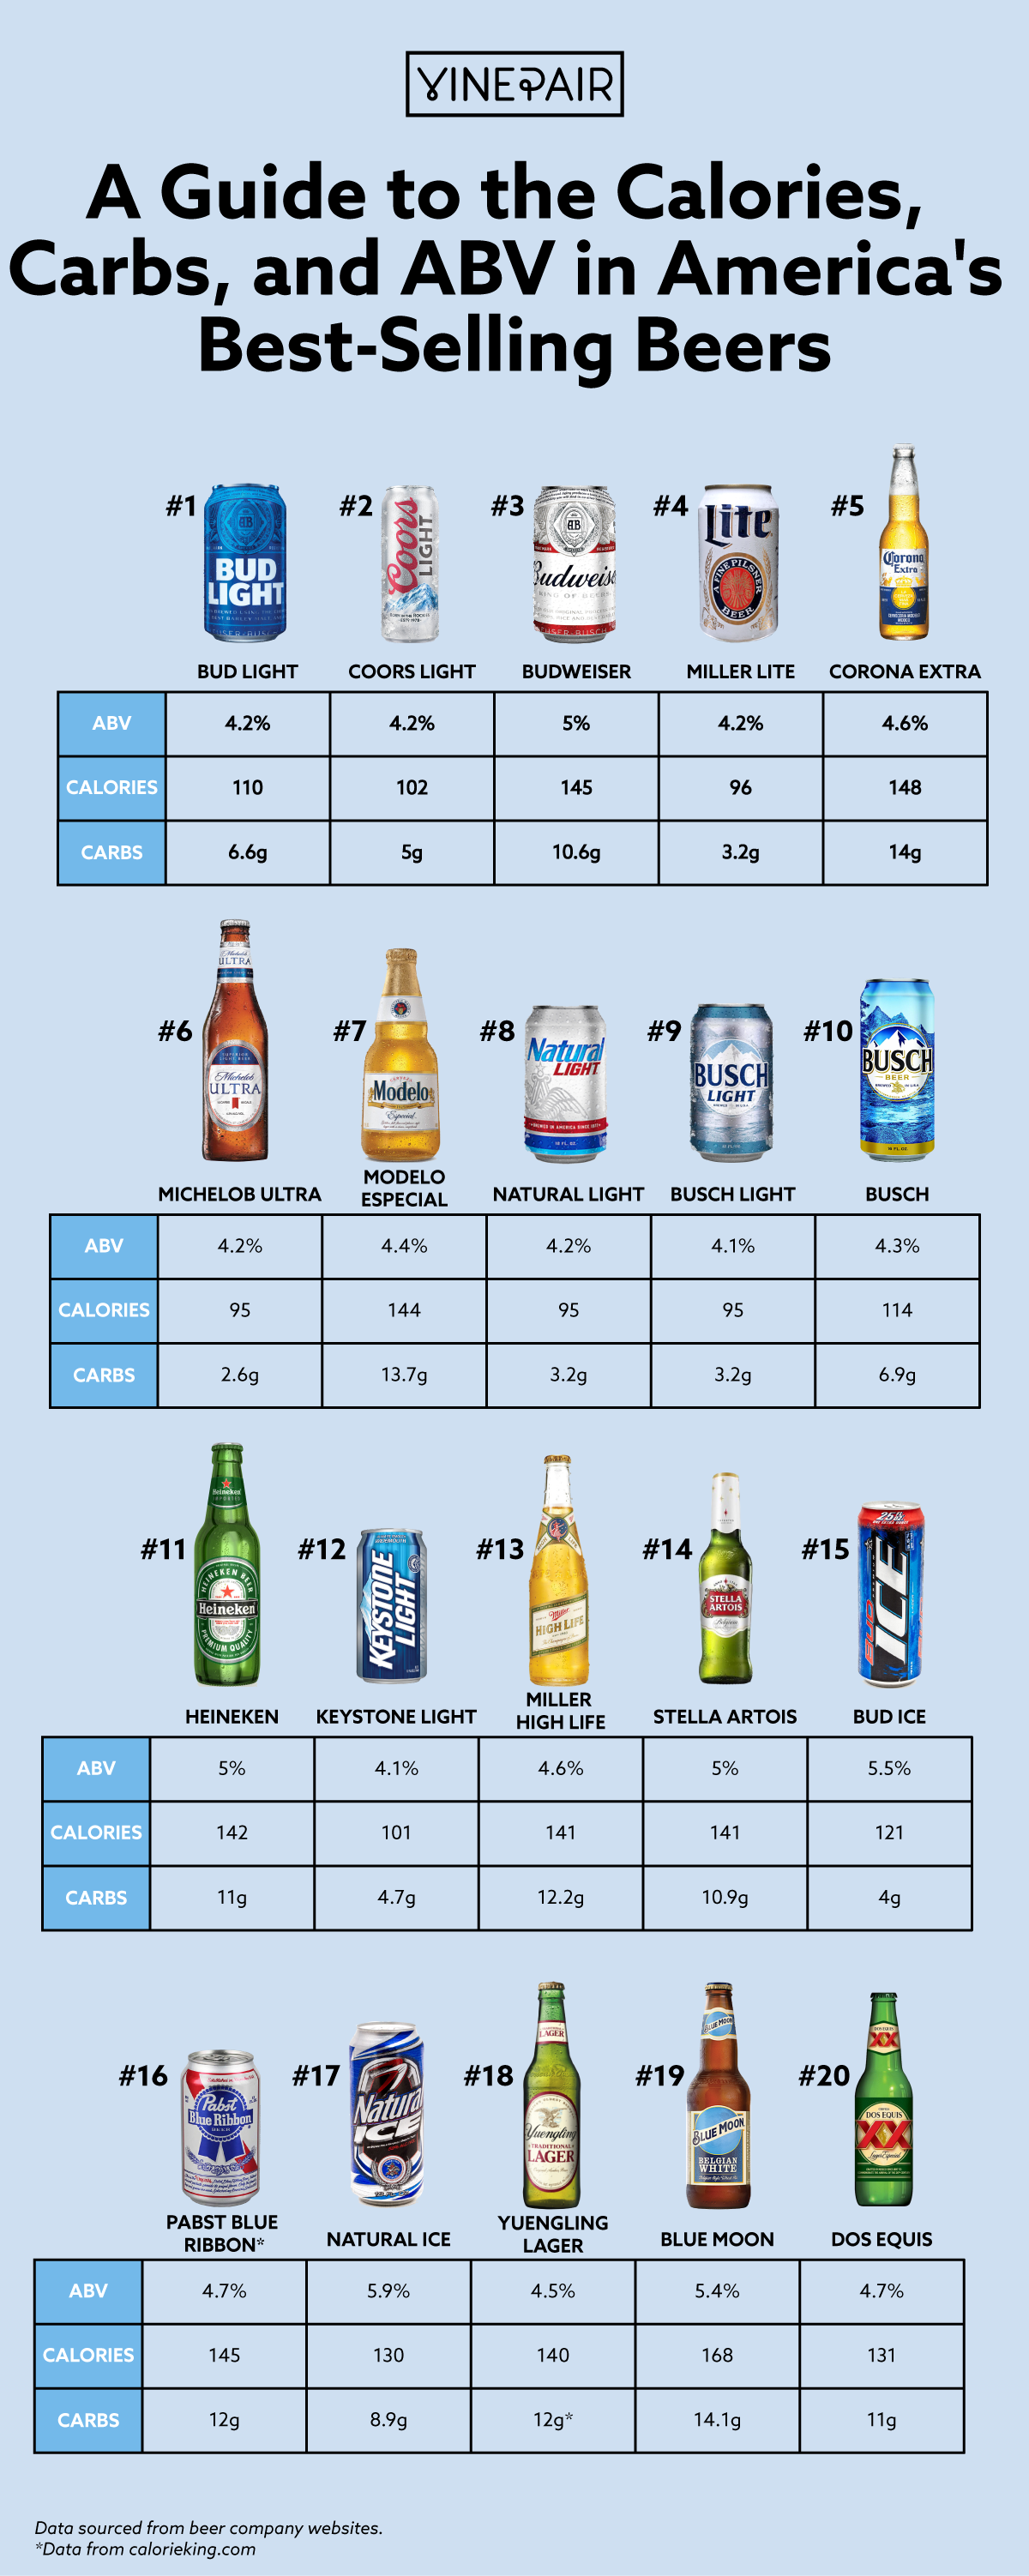 A Guide to the Calories, Carbs, and ABV in America's Bestselling Beers